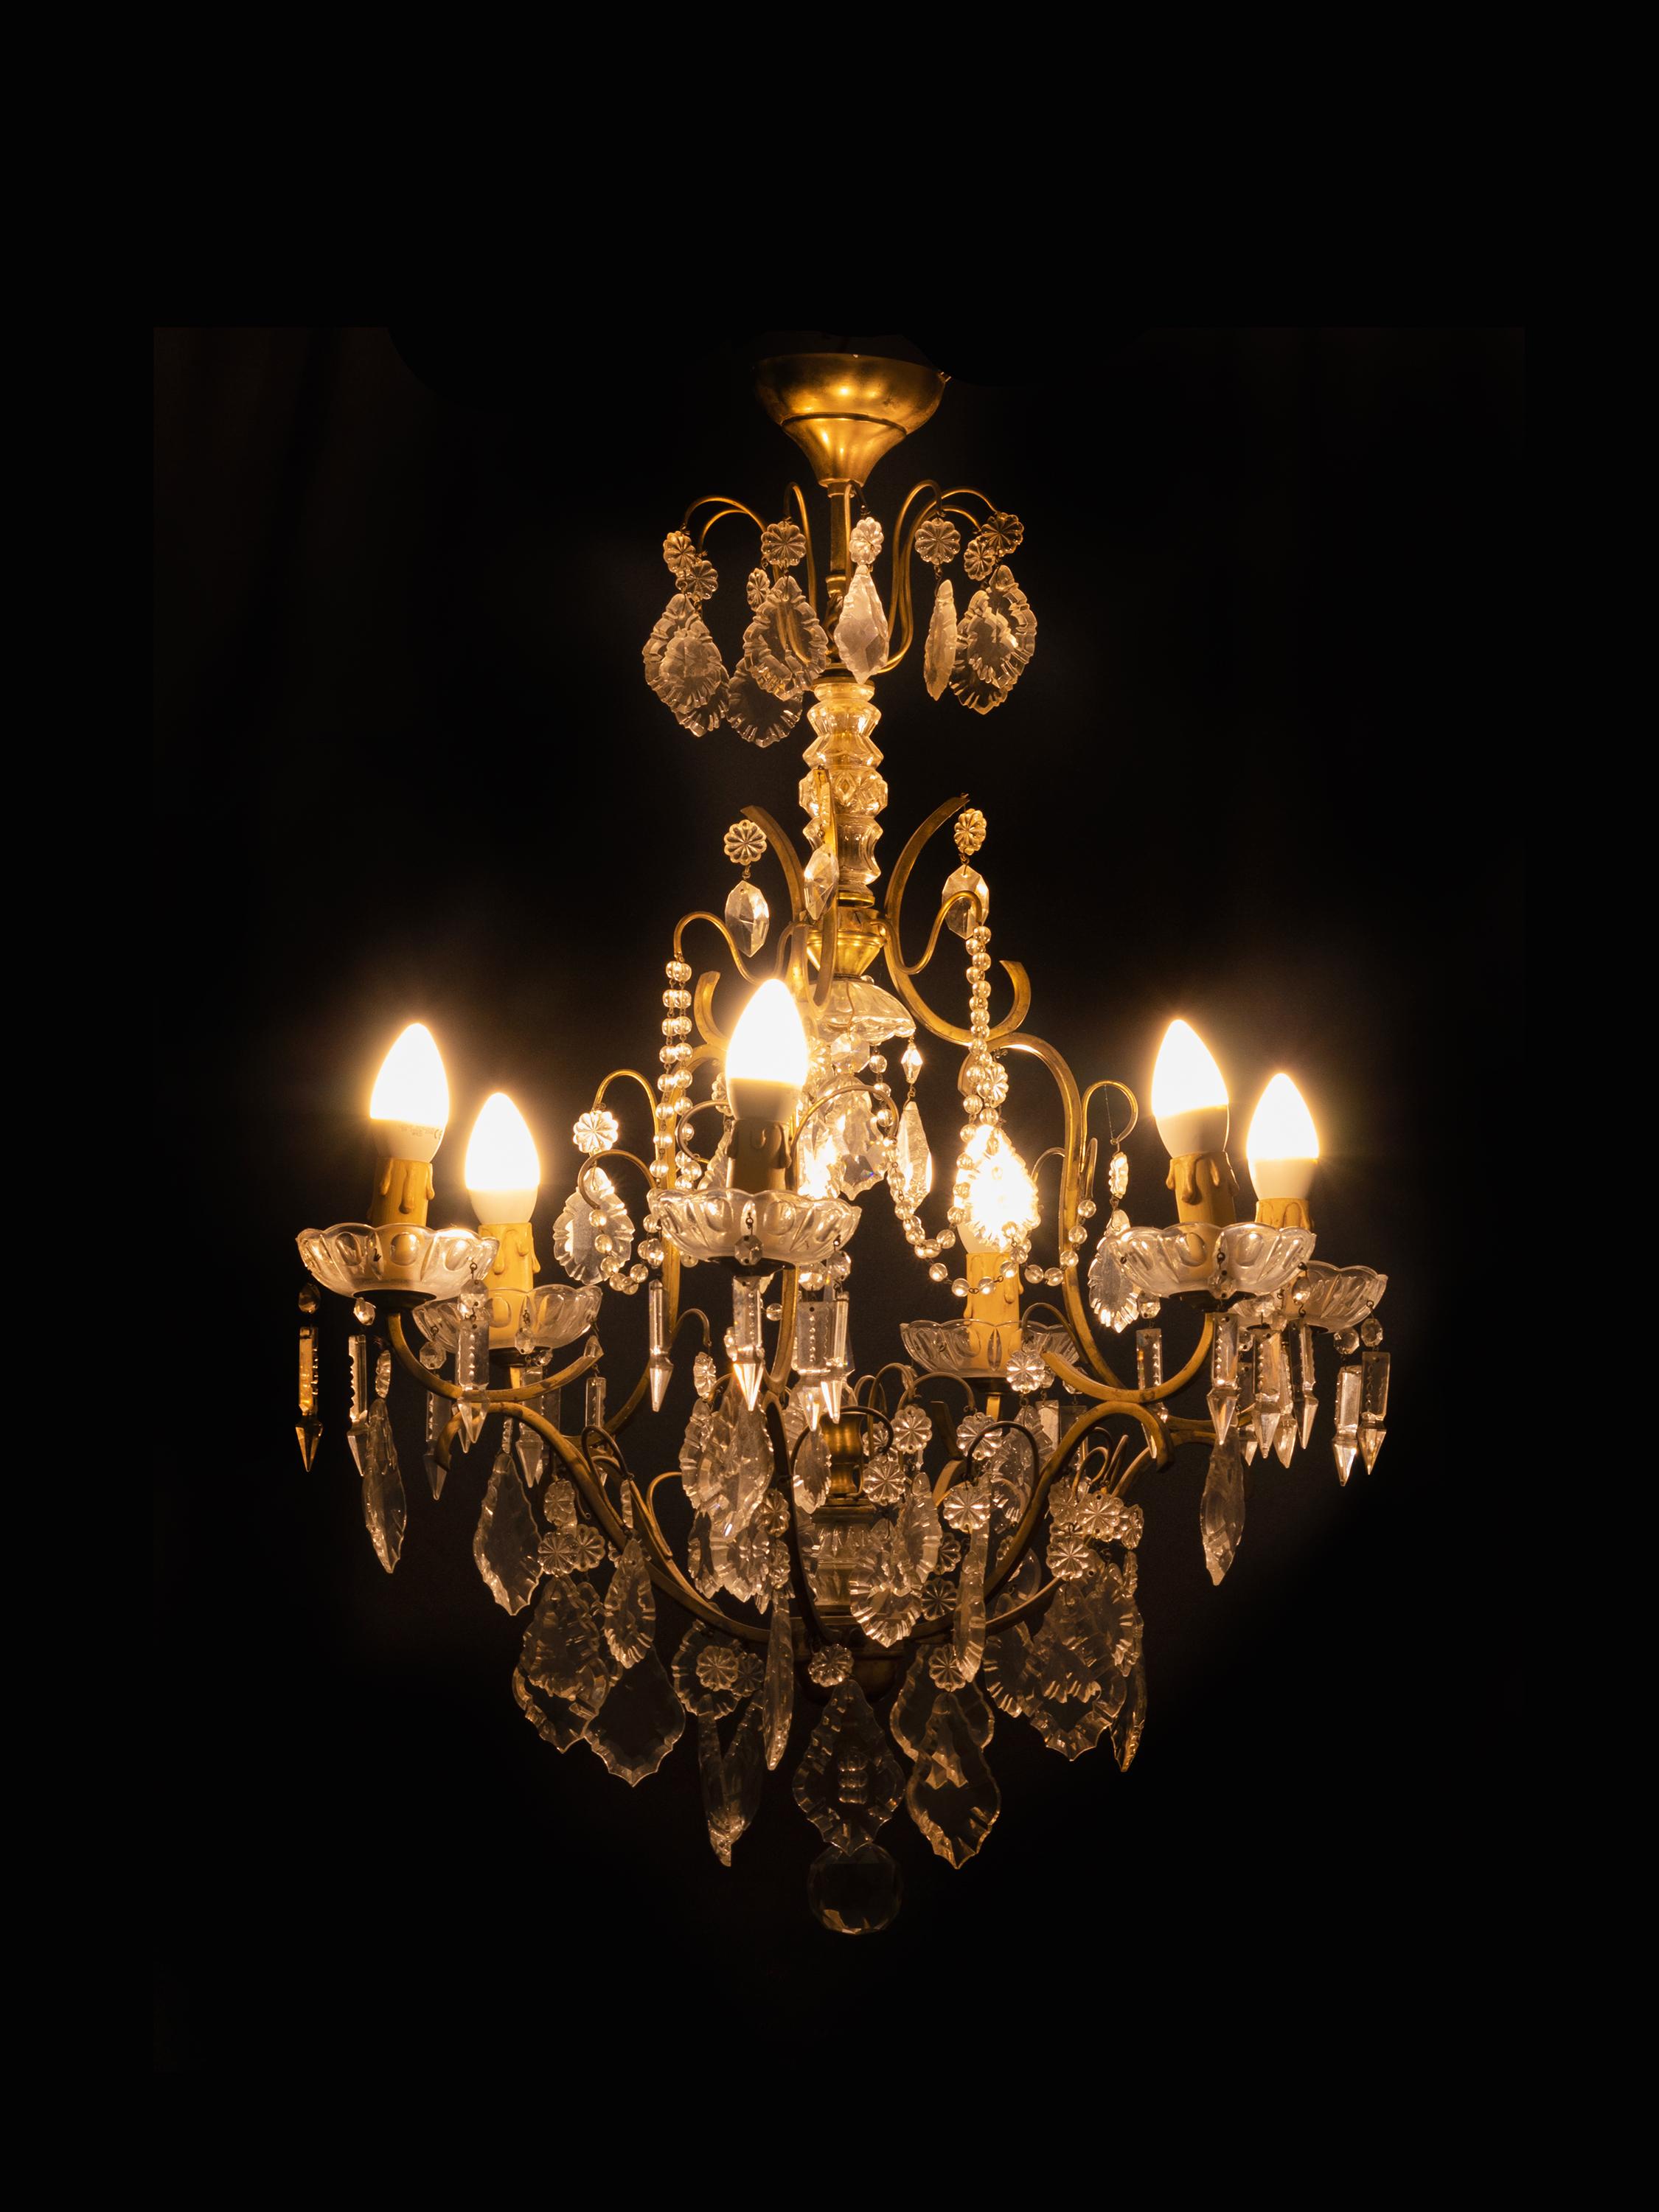 A Louis XV-Style bronze chandelier with crystal pendants and finials, completed and rewired.
Six arms with candlestick holders and six light sockets.

A superb piece of art and class.

The chandelier is currently wired for both European Union and US